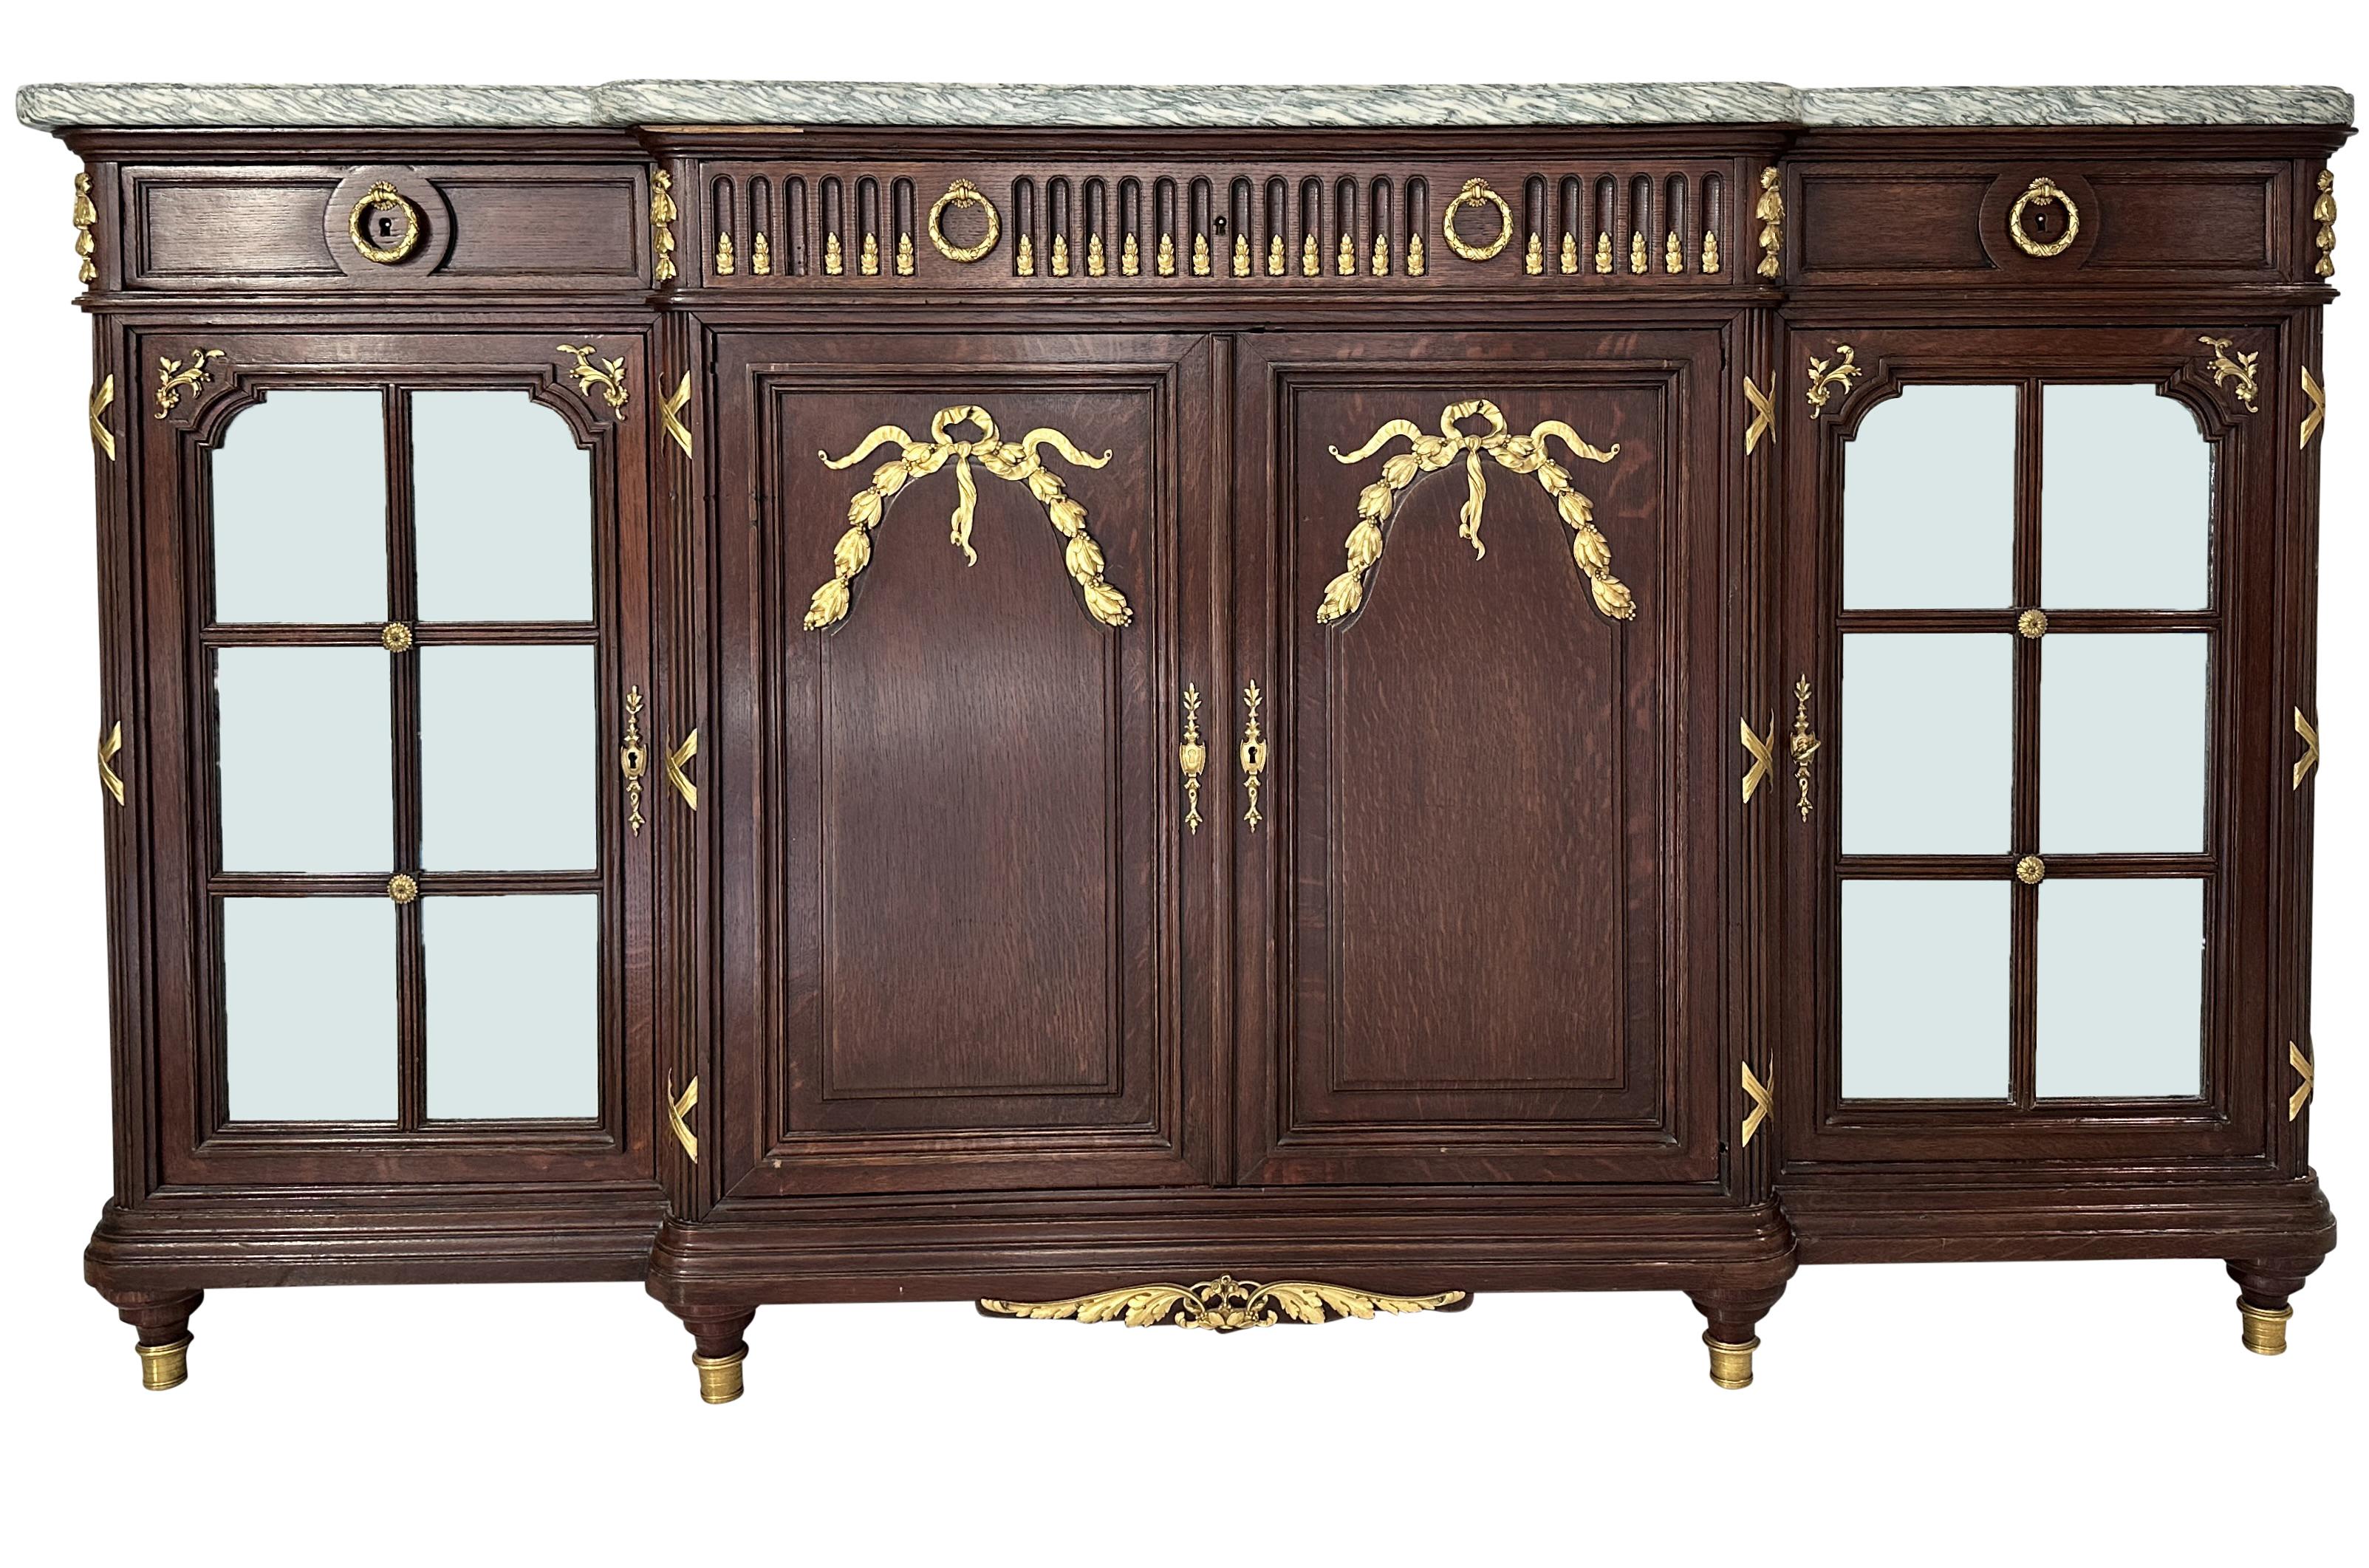 Antique 19th century gilt bronze mounted quarter sawn French oak marble top and mirrored enfilade buffet . Fine quality antique French buffet with carved fluted columns and gilt bronze mounts having your traditional Louis XVI motifs such as laurel